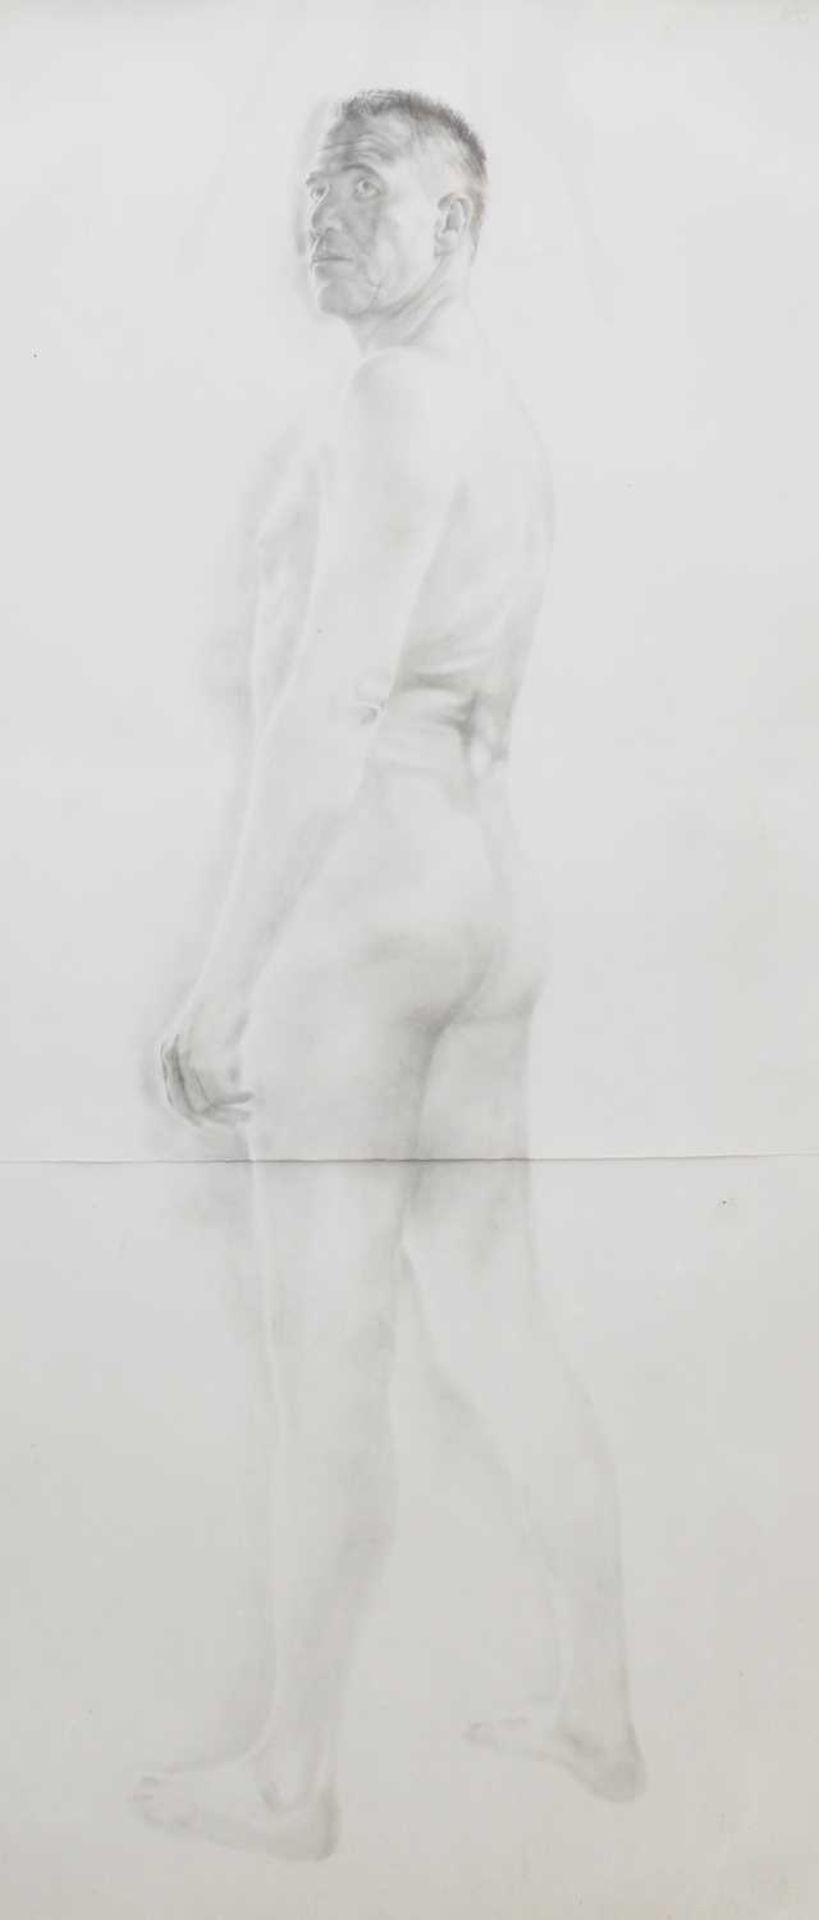 A NUDE PENCIL DRAWING